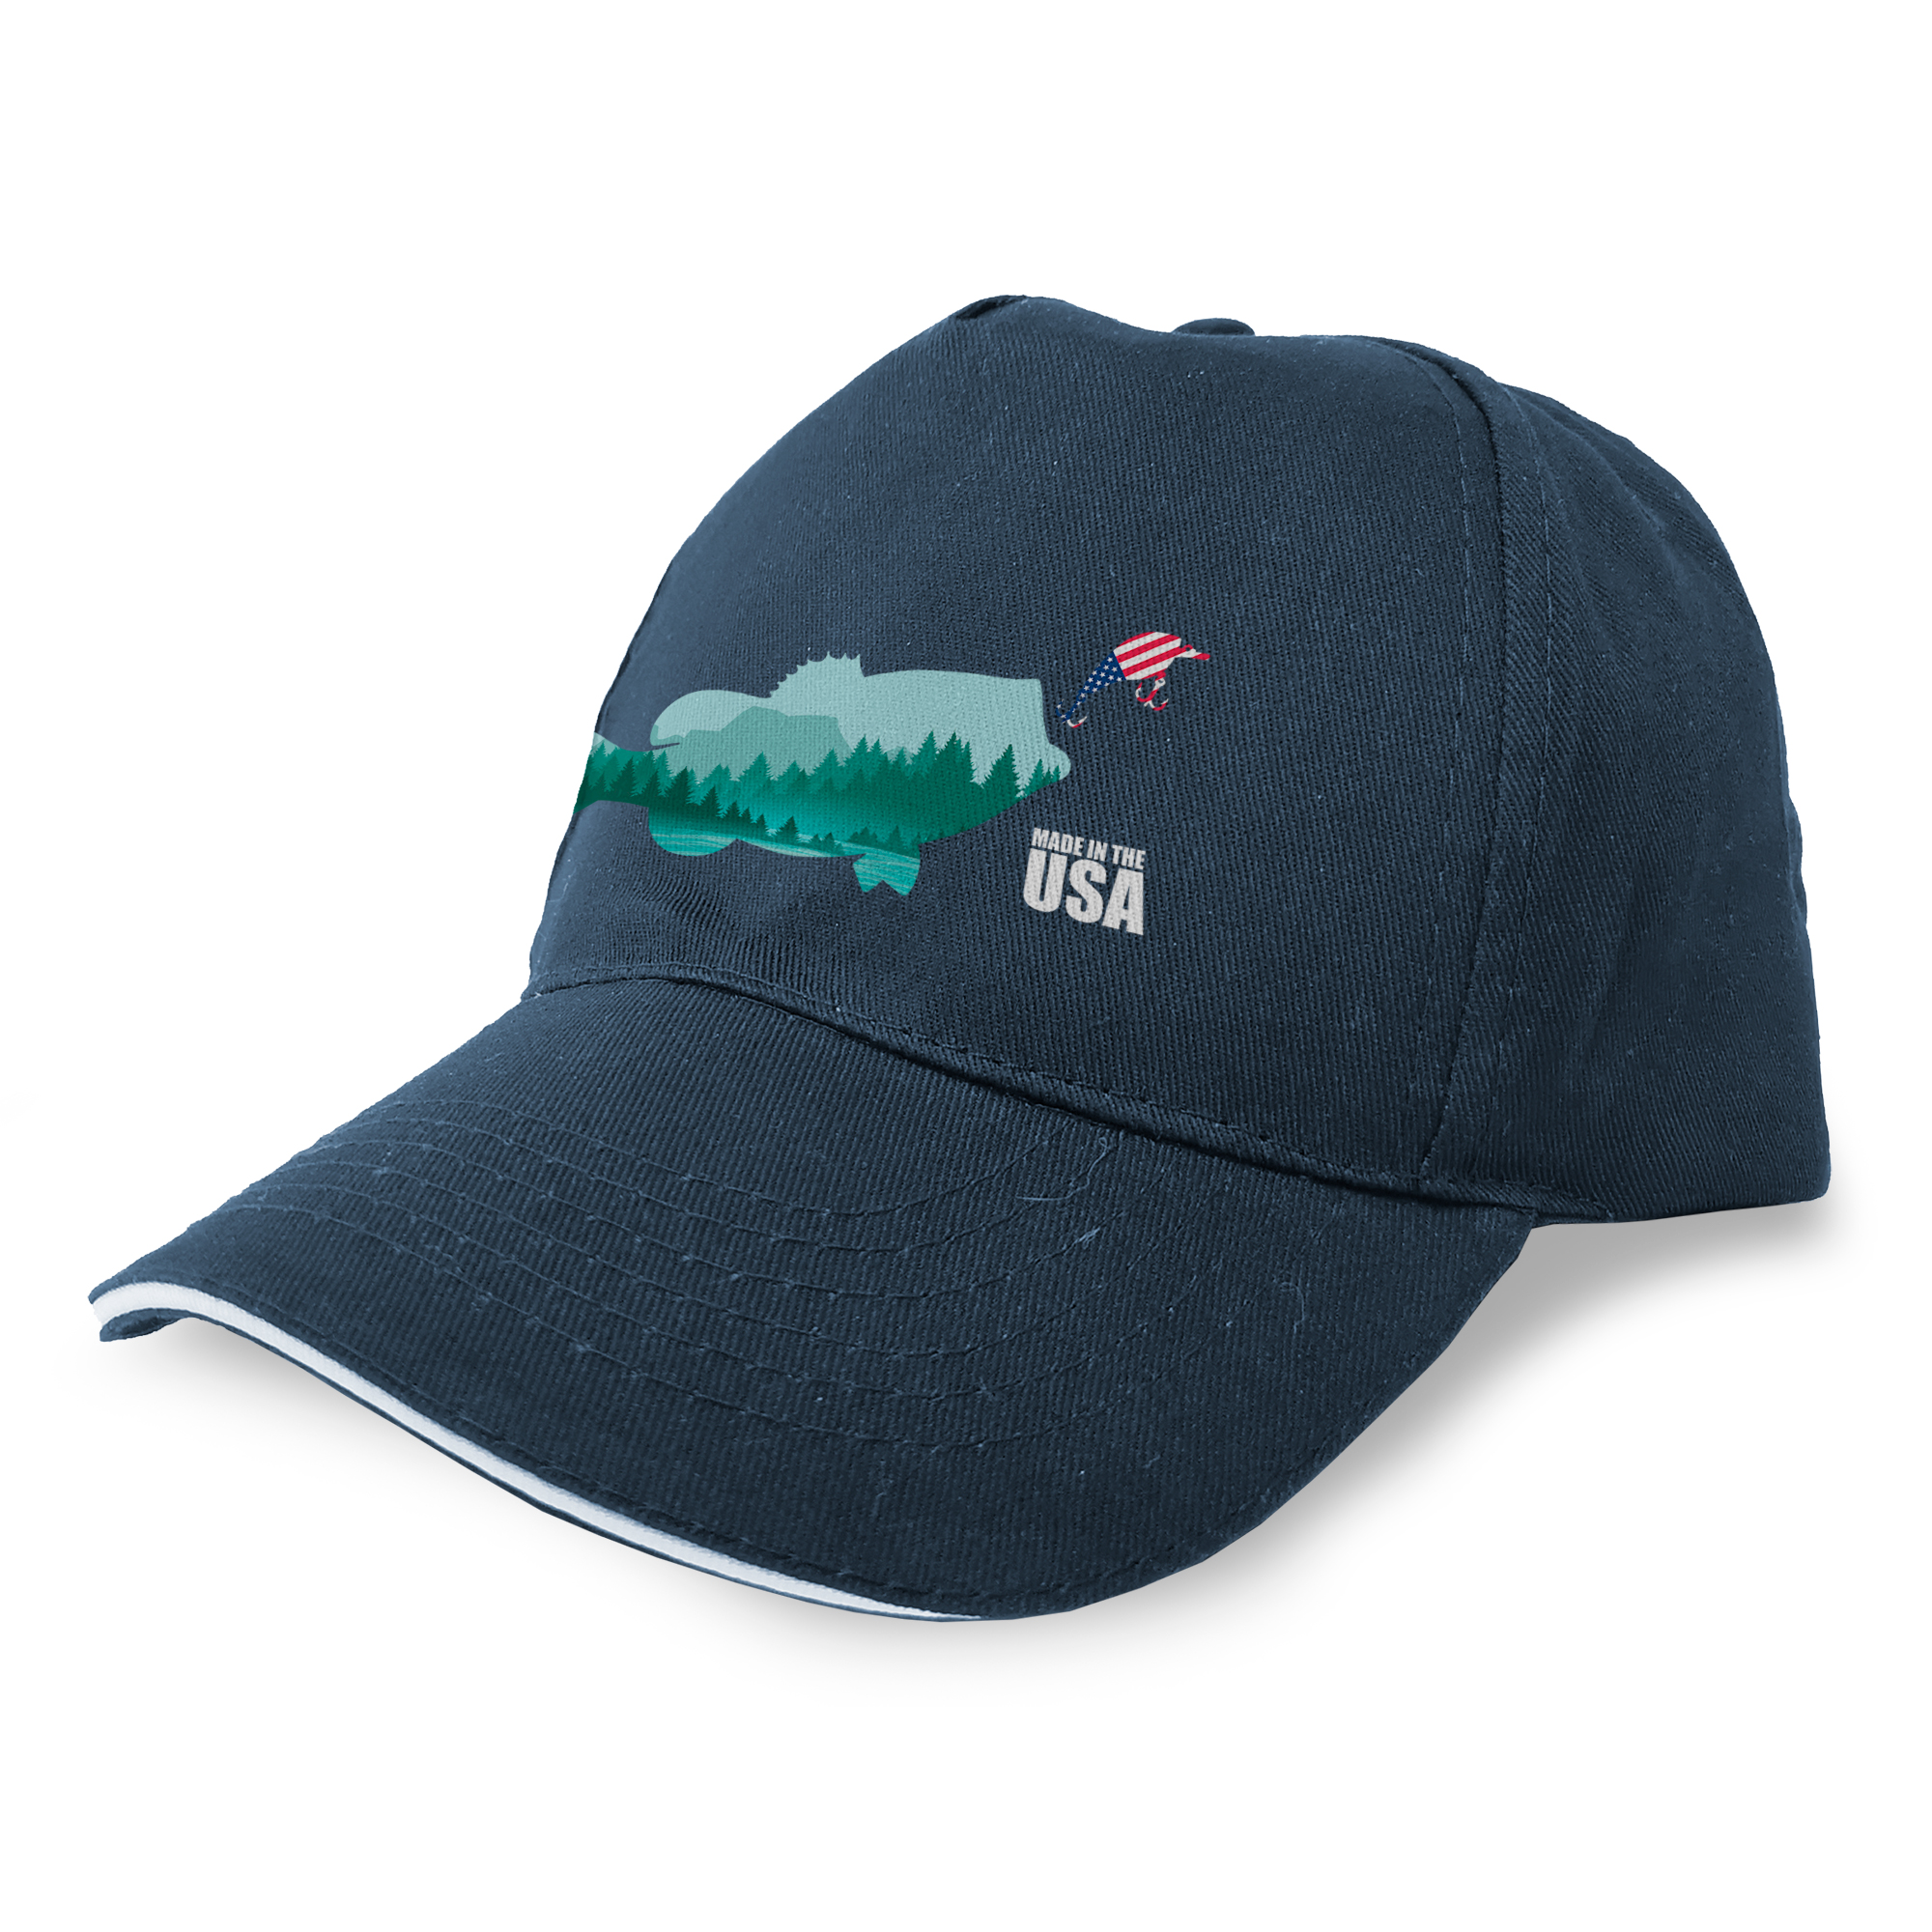 Gorra Pesca Made in the USA Unisex